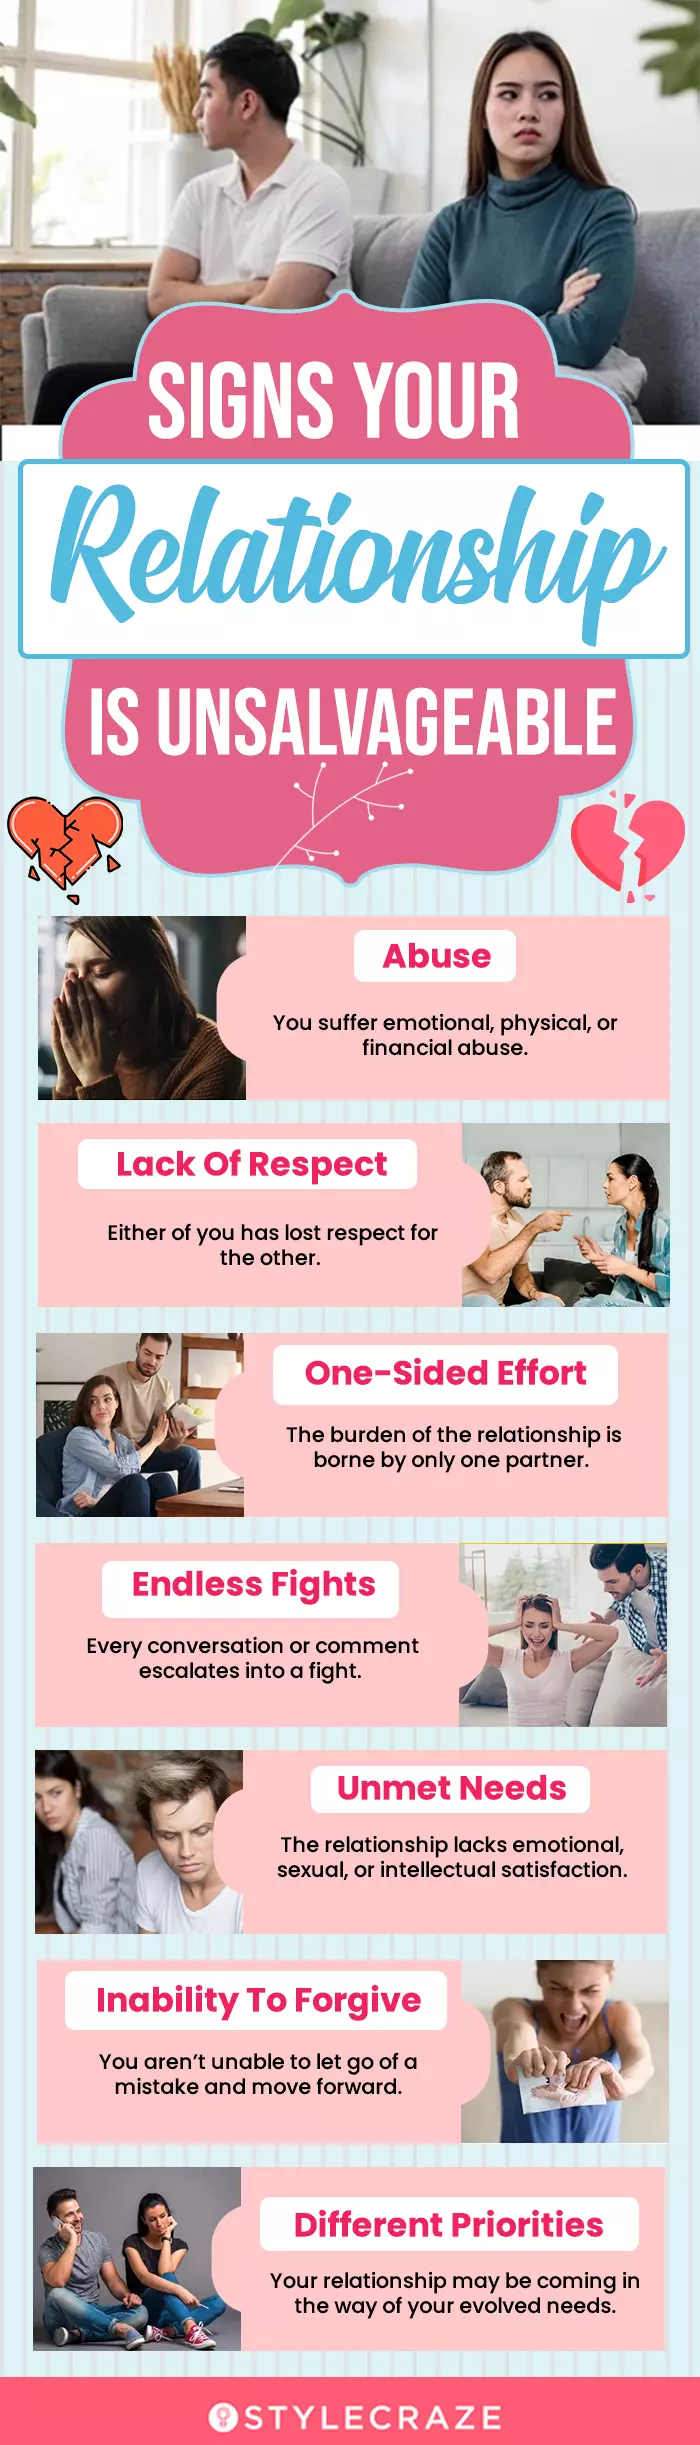 signs your relationship is unsalvageable (infographic)